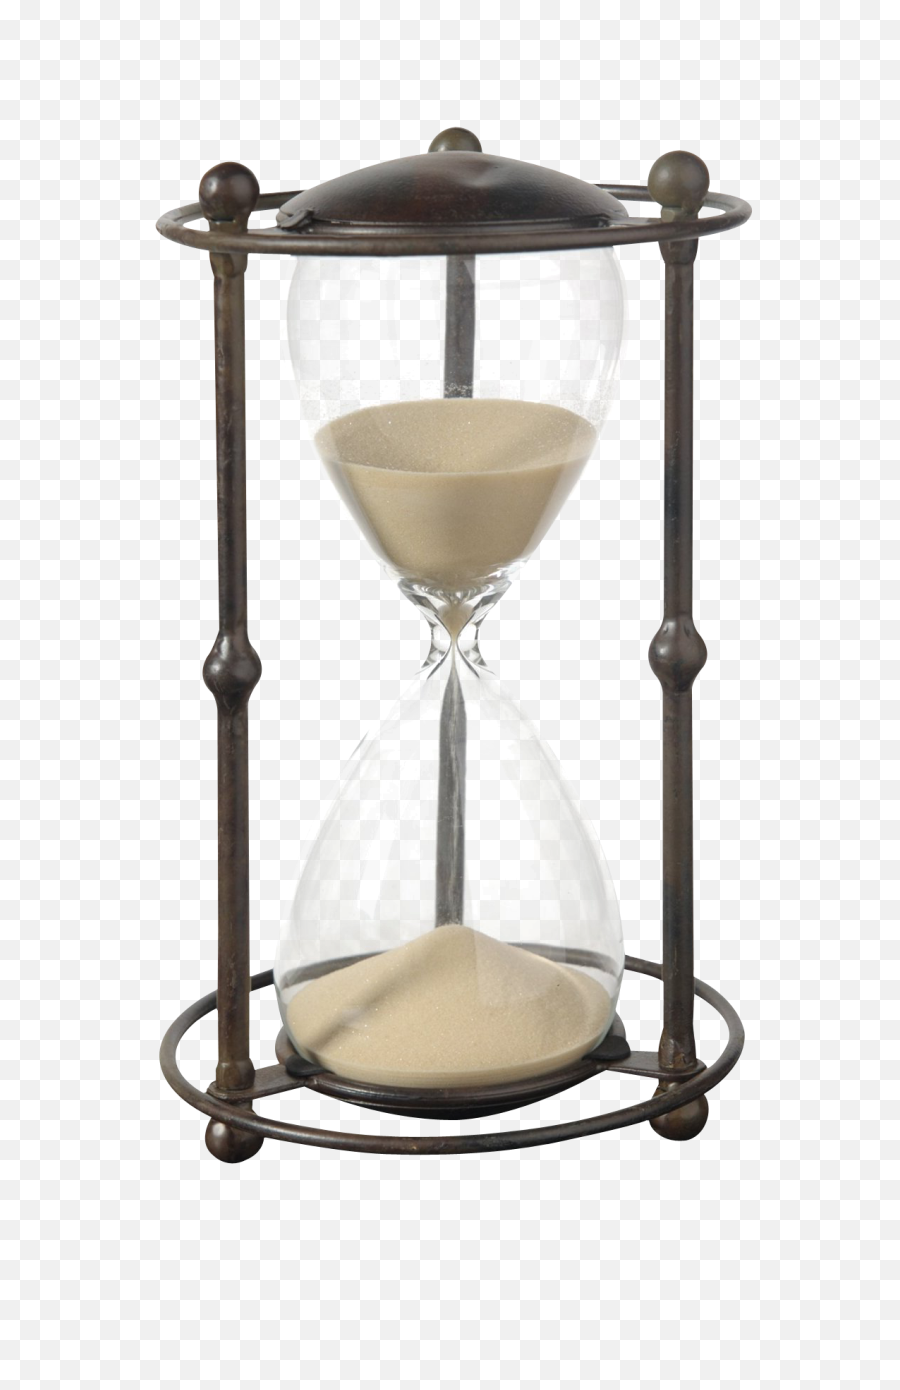 Hourglass Png Image - Transparent Hourglass Png,Hourglass Transparent Background